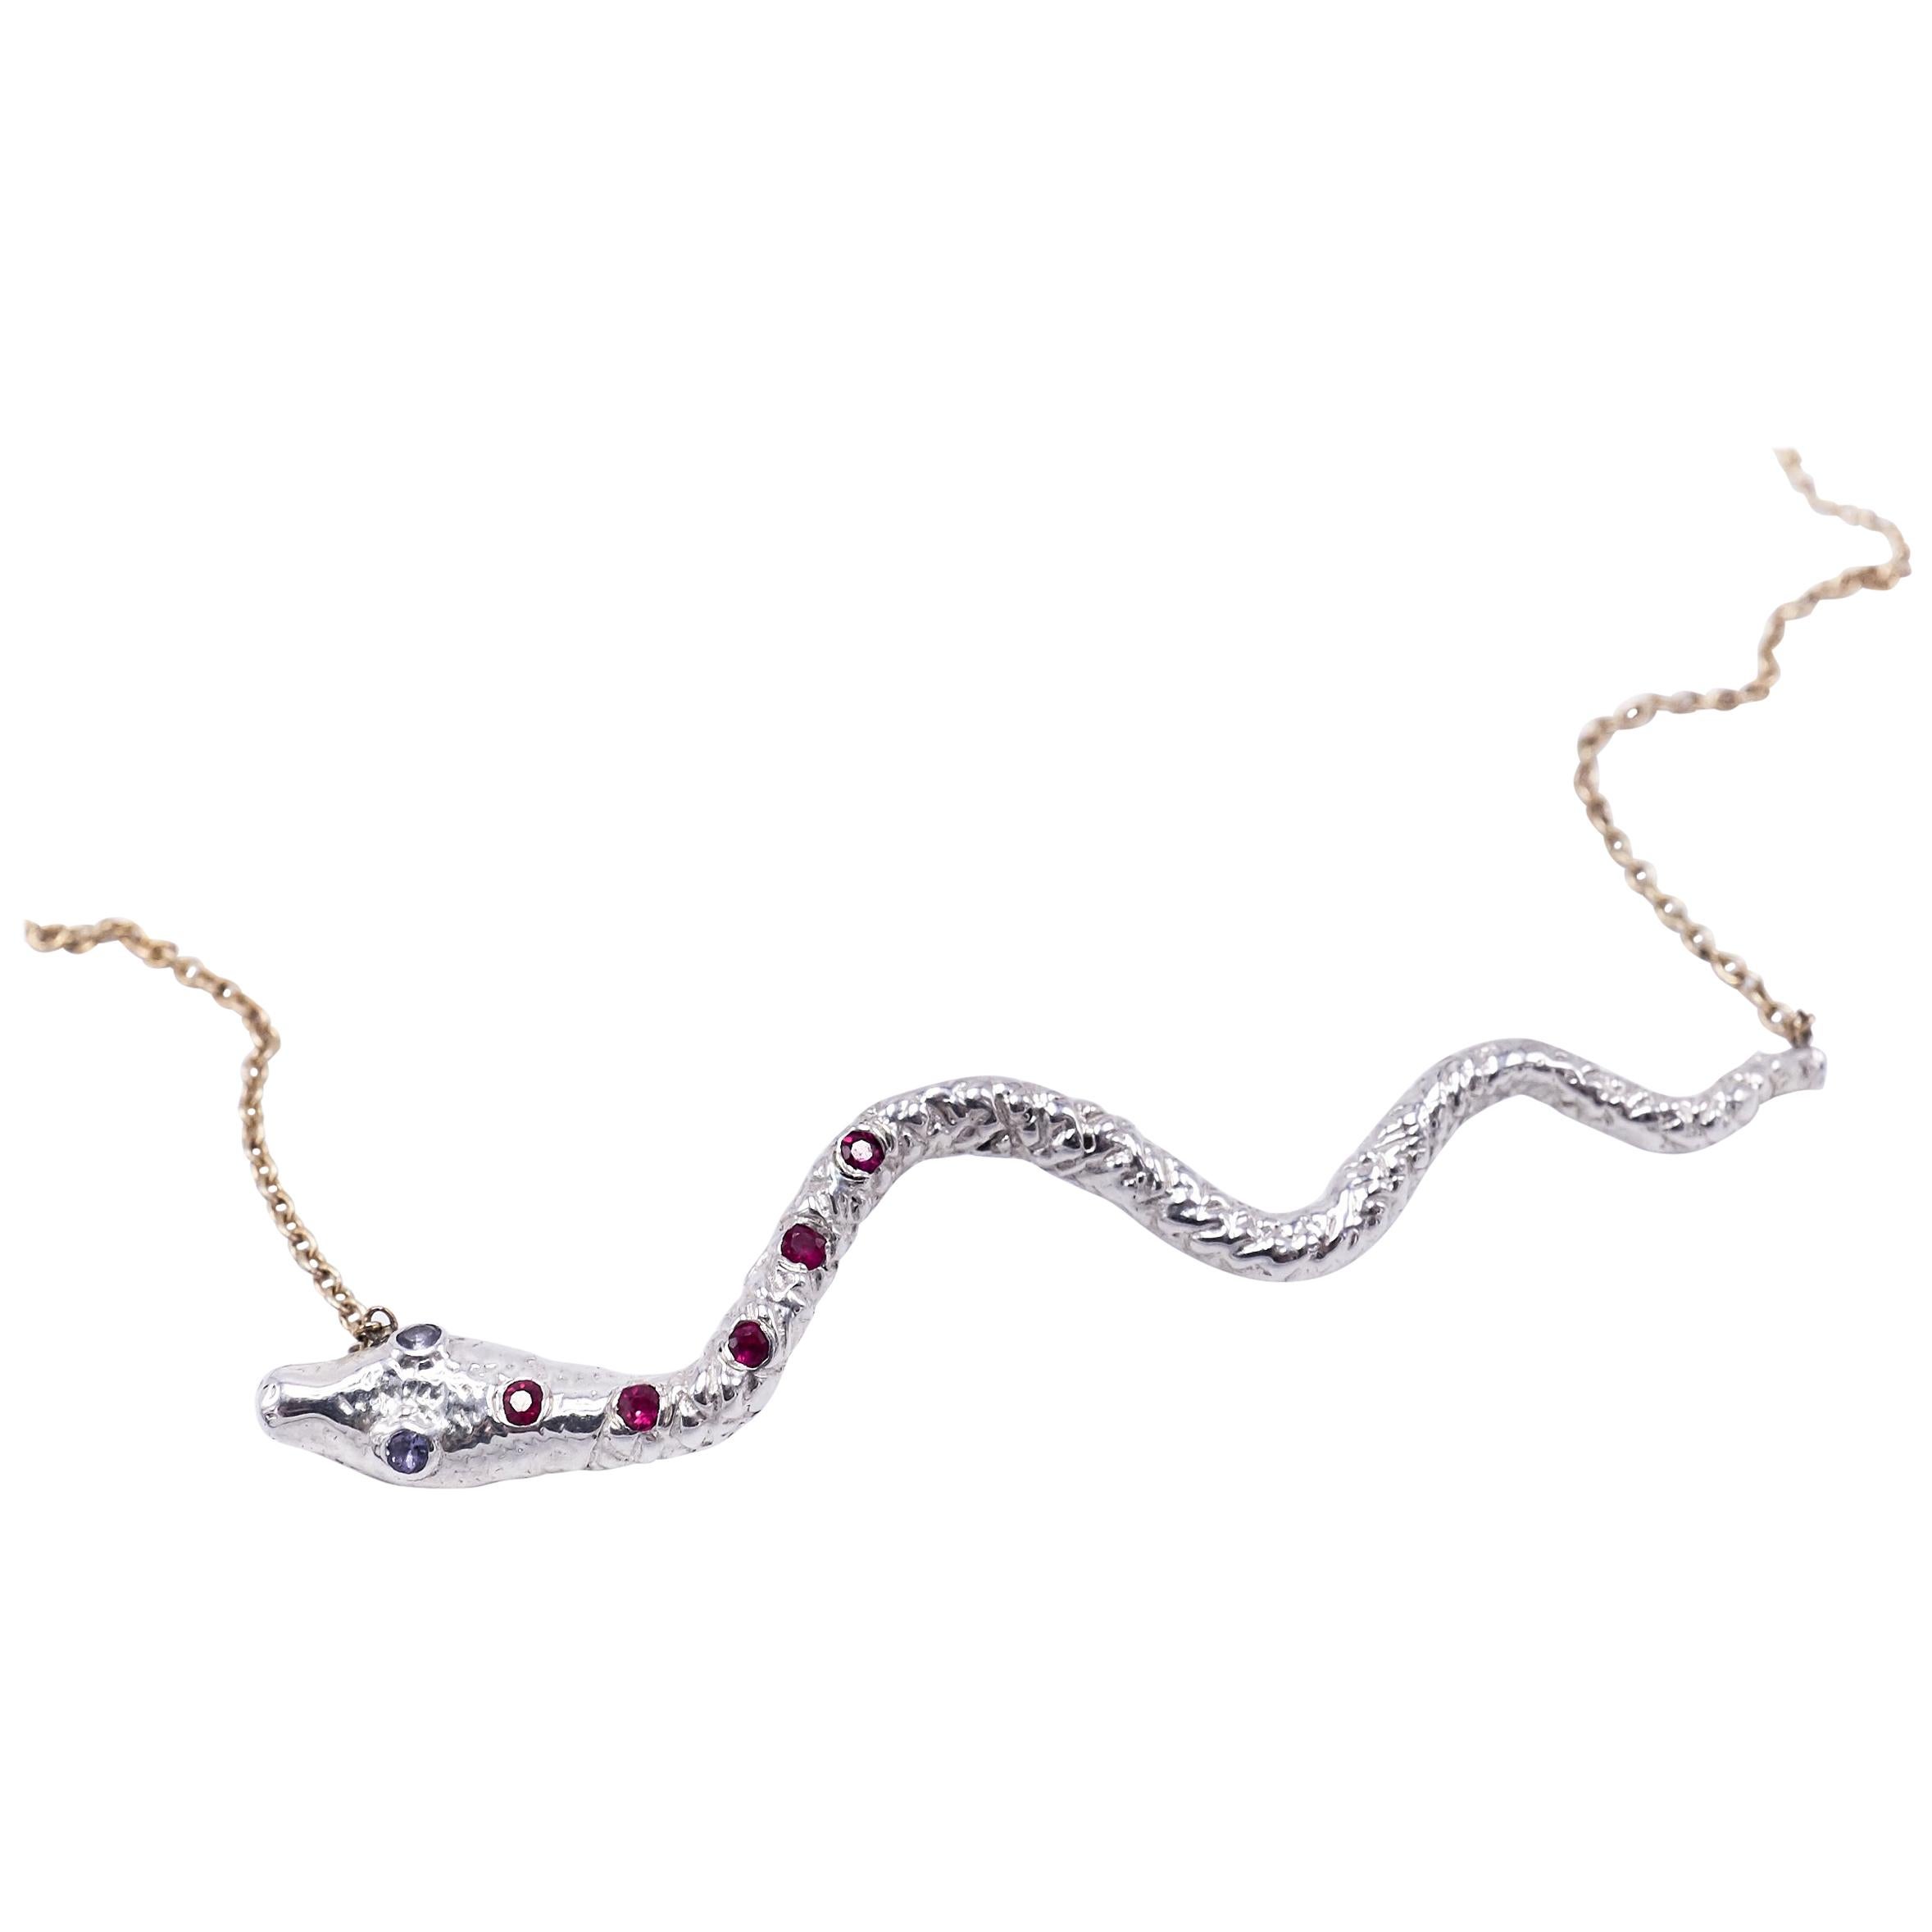 Contemporary Snake Necklace Silver Ruby Iolite Gold Filled Chain J Dauphin For Sale